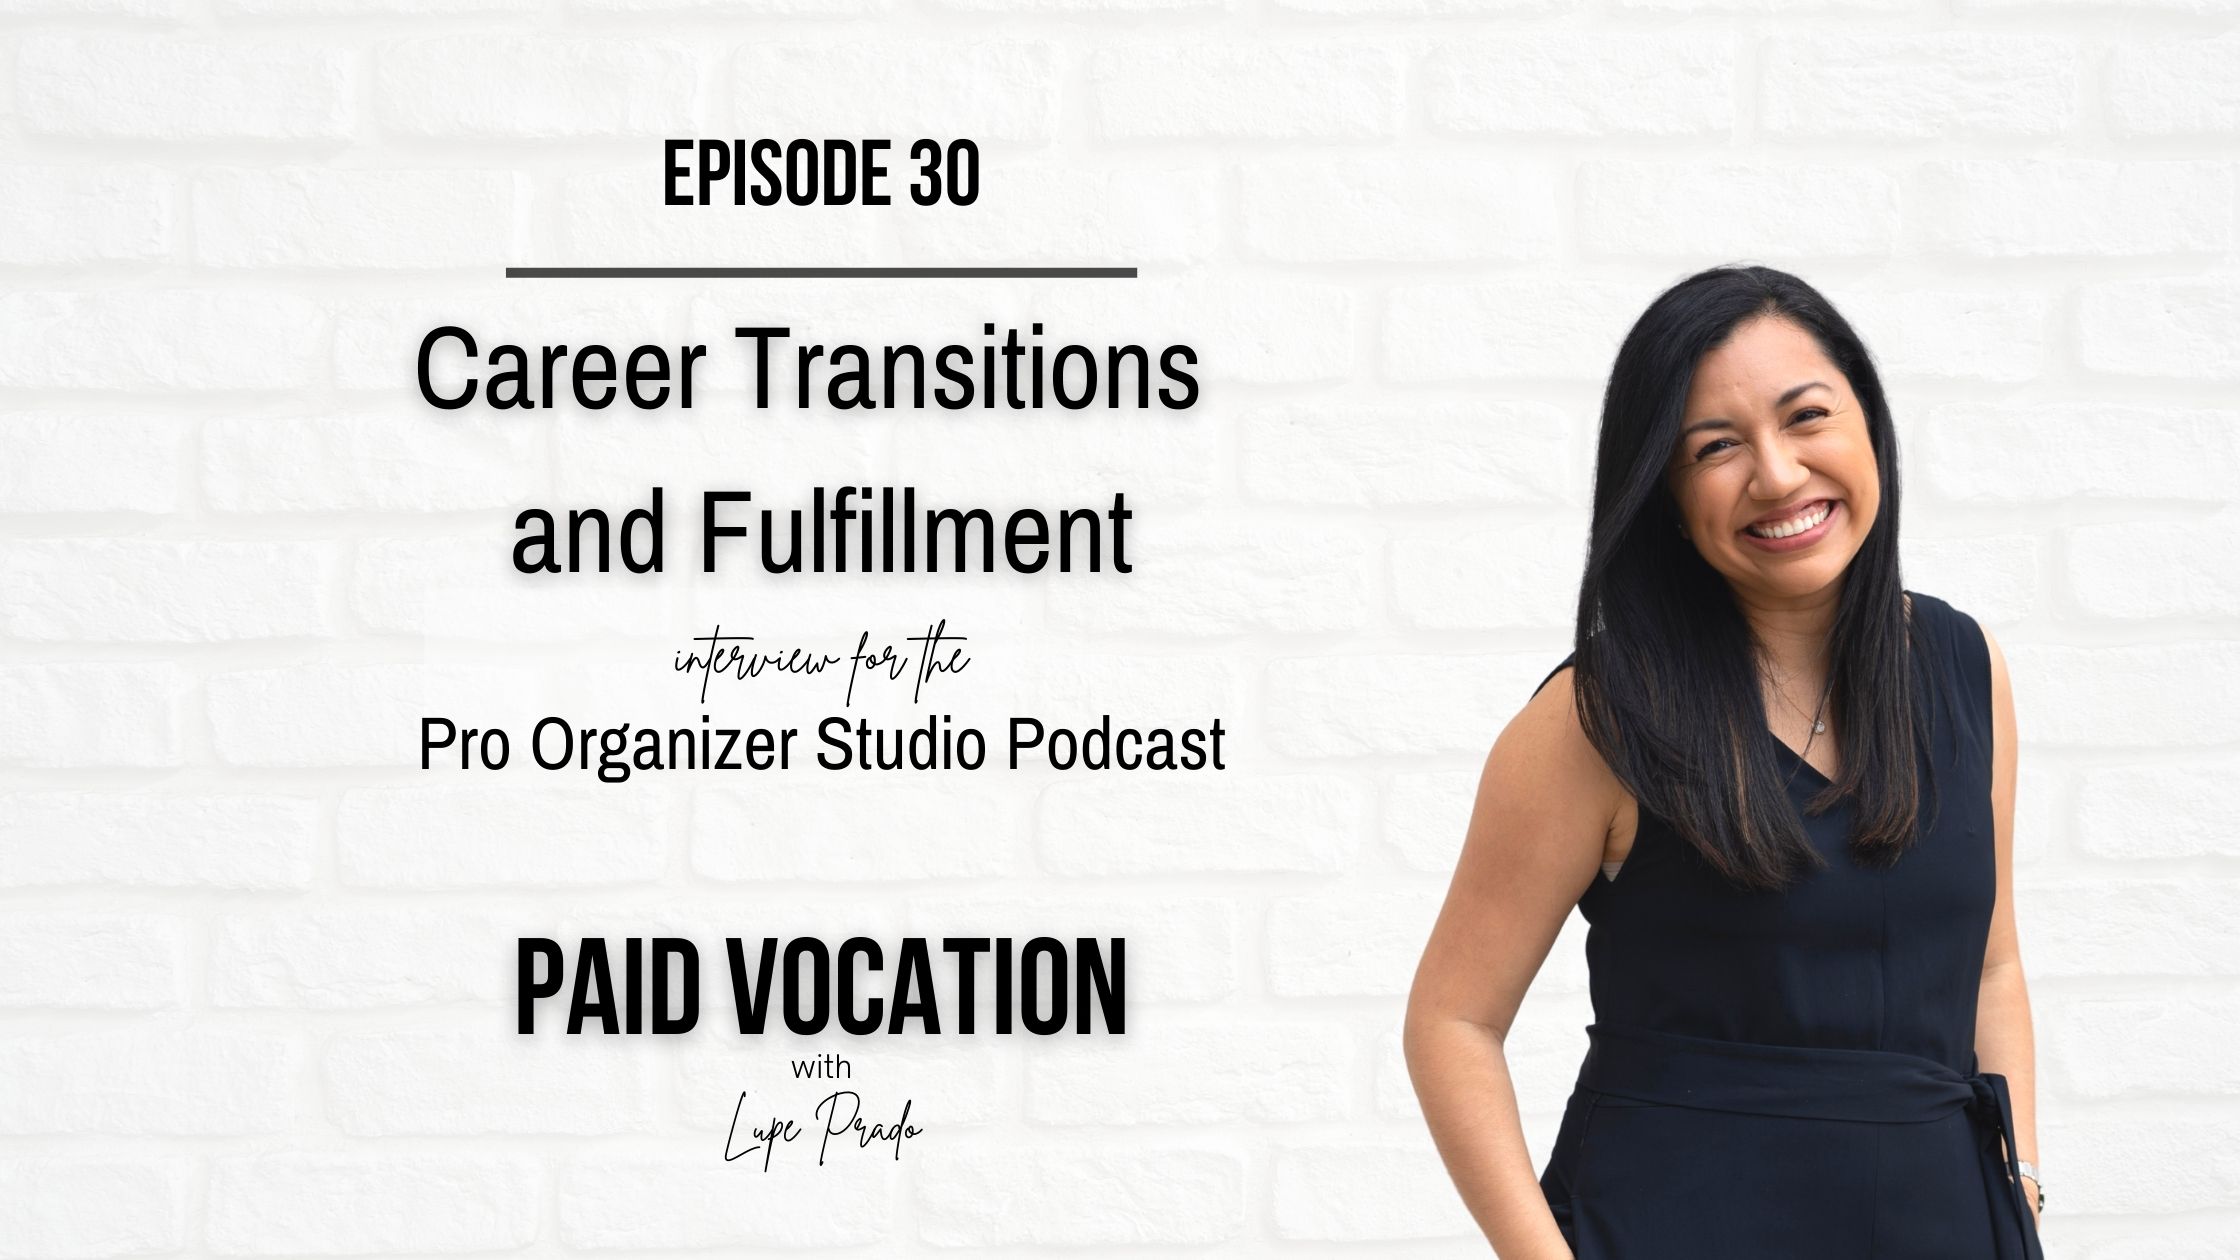 Career Transitions and Fulfillment | Interview for the Pro Organizer Studio Podcast